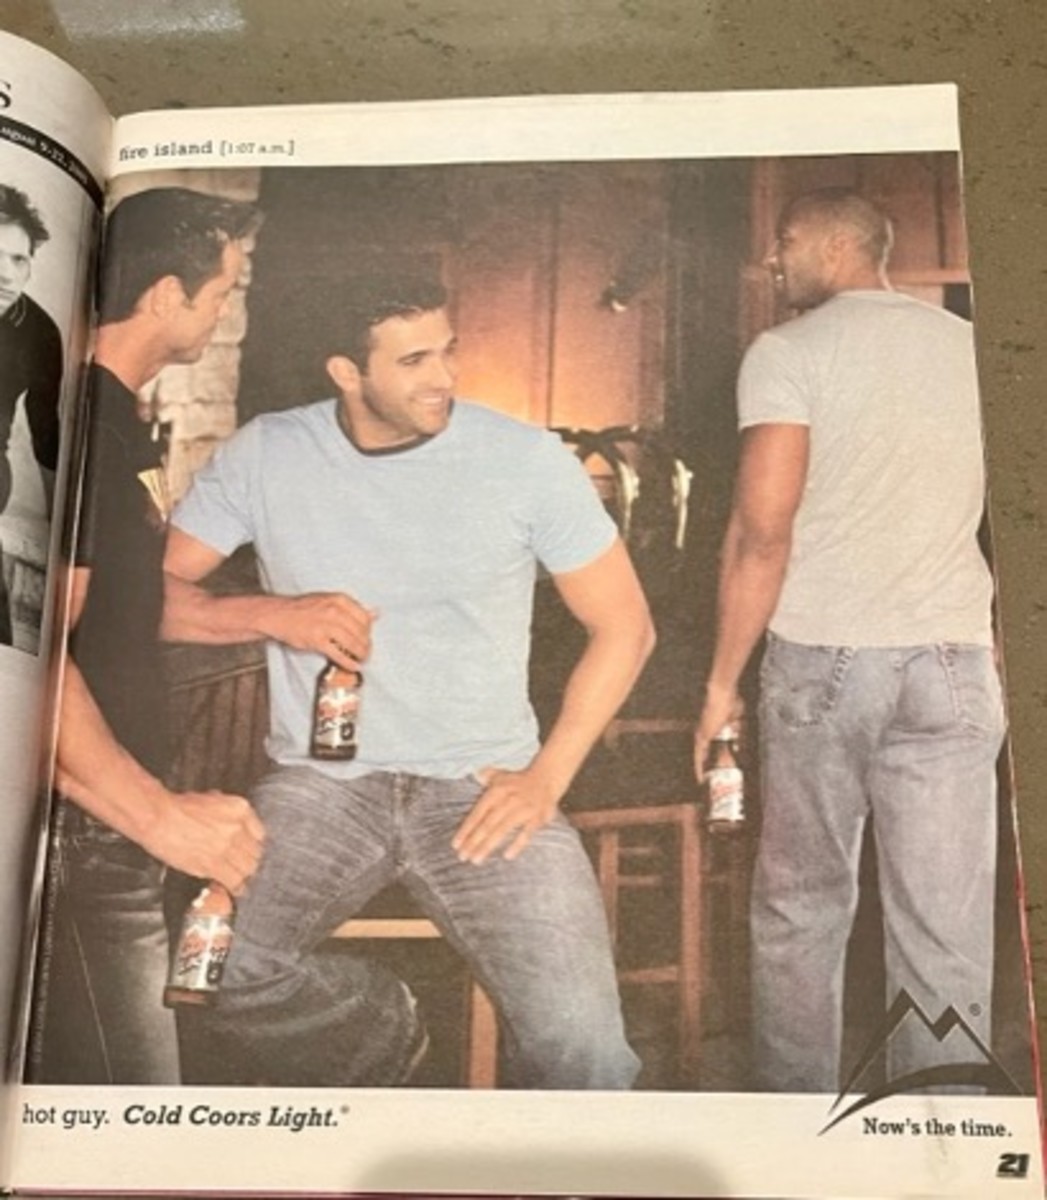 Full page, colored ads in gay community print publications in 1997-1998 by which Coors tried to make the community believe the Coors Boycott was over and deceive gay people that Coors was an ally when Coors was in fact one of LGBTQ’s major enemies.